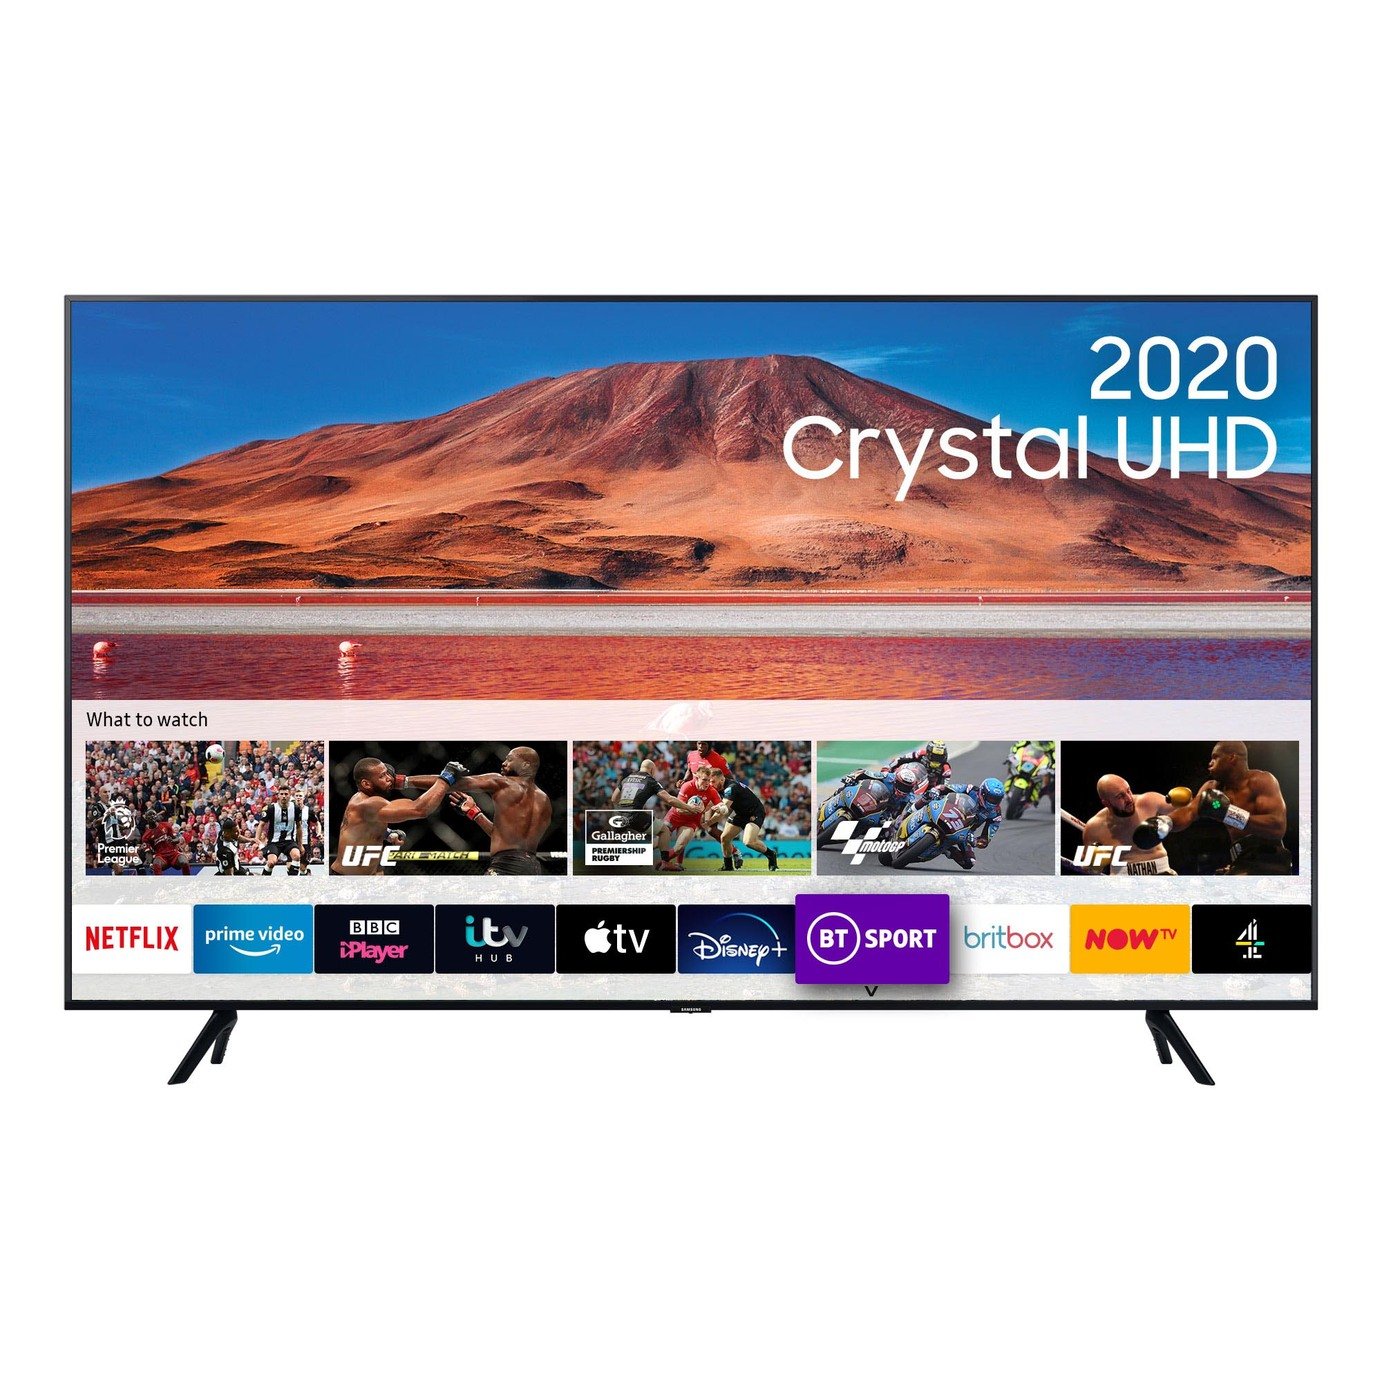 Samsung 43 Inch UE43TU7000KXXU Smart 4K Ultra HD TV with HDR Review